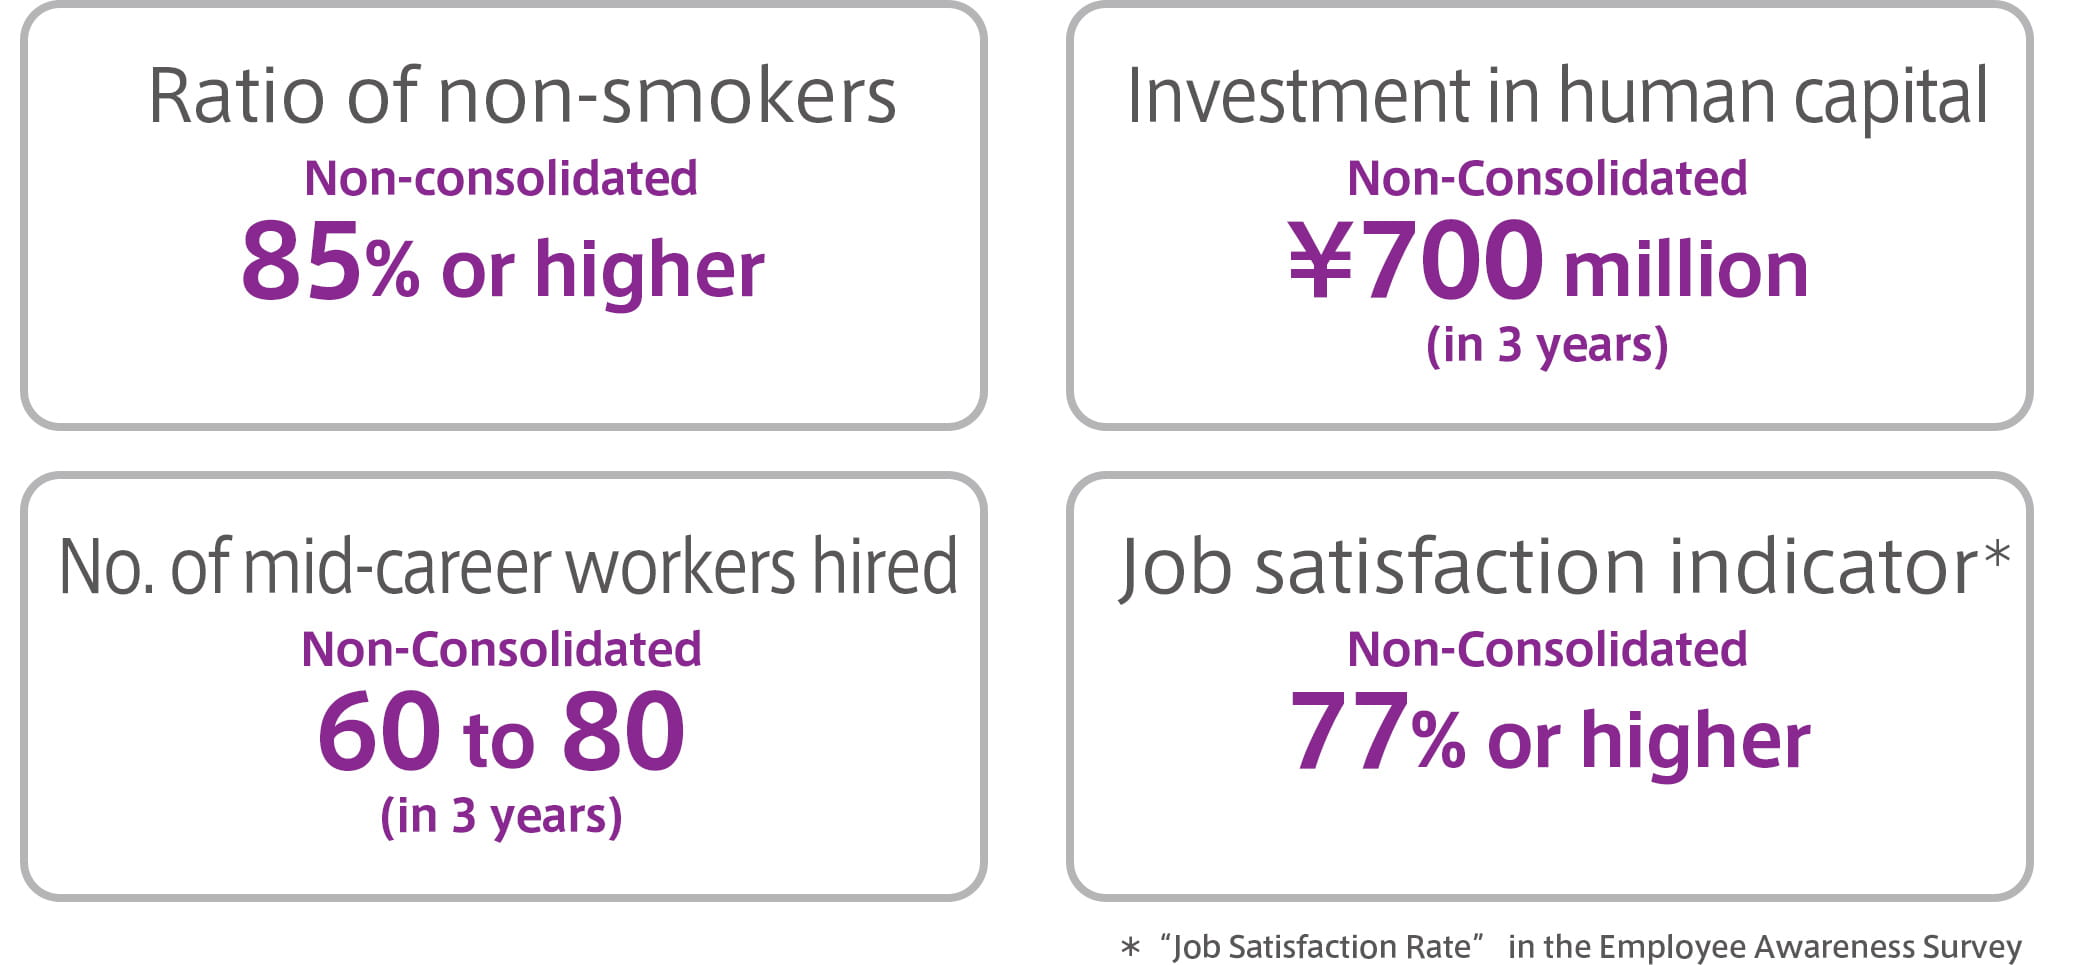 Ratio of non-smokers: Non-consolidated 85% or higher, Investment in human capital: Non-consolidated 700 million yen in 3 years, No. of mid-career workers hired: Non-consolidated 60 to 80 in 3 years, Job satisfaction indicator*: Non-consolidated 77% or higher * “Job Satisfaction Rate” in the Employee Awareness Survey